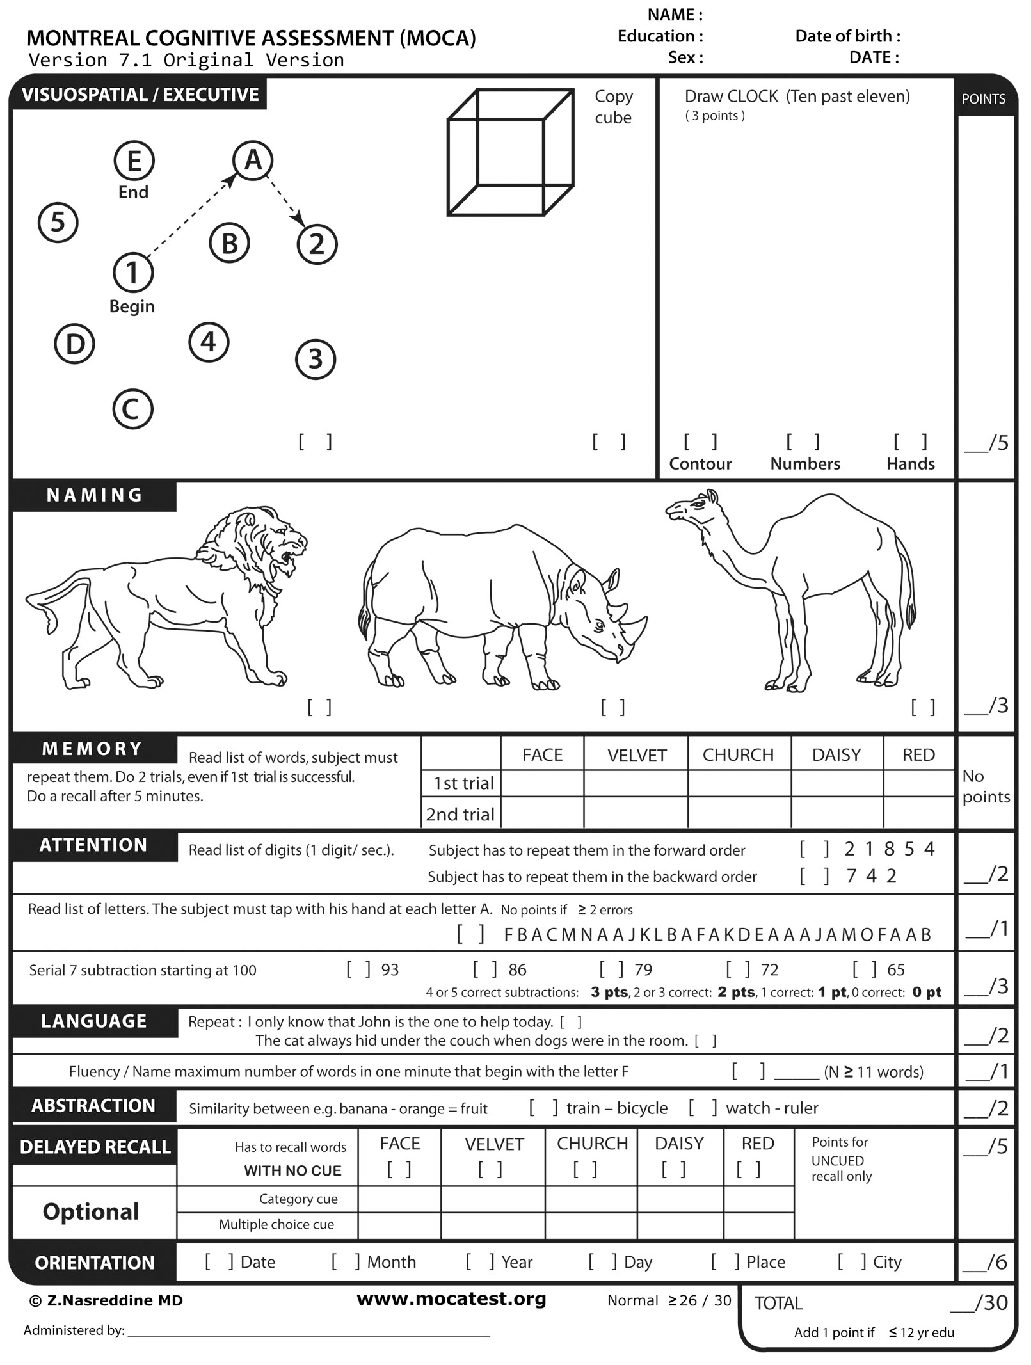 montreal cognitive assessment test known as moca